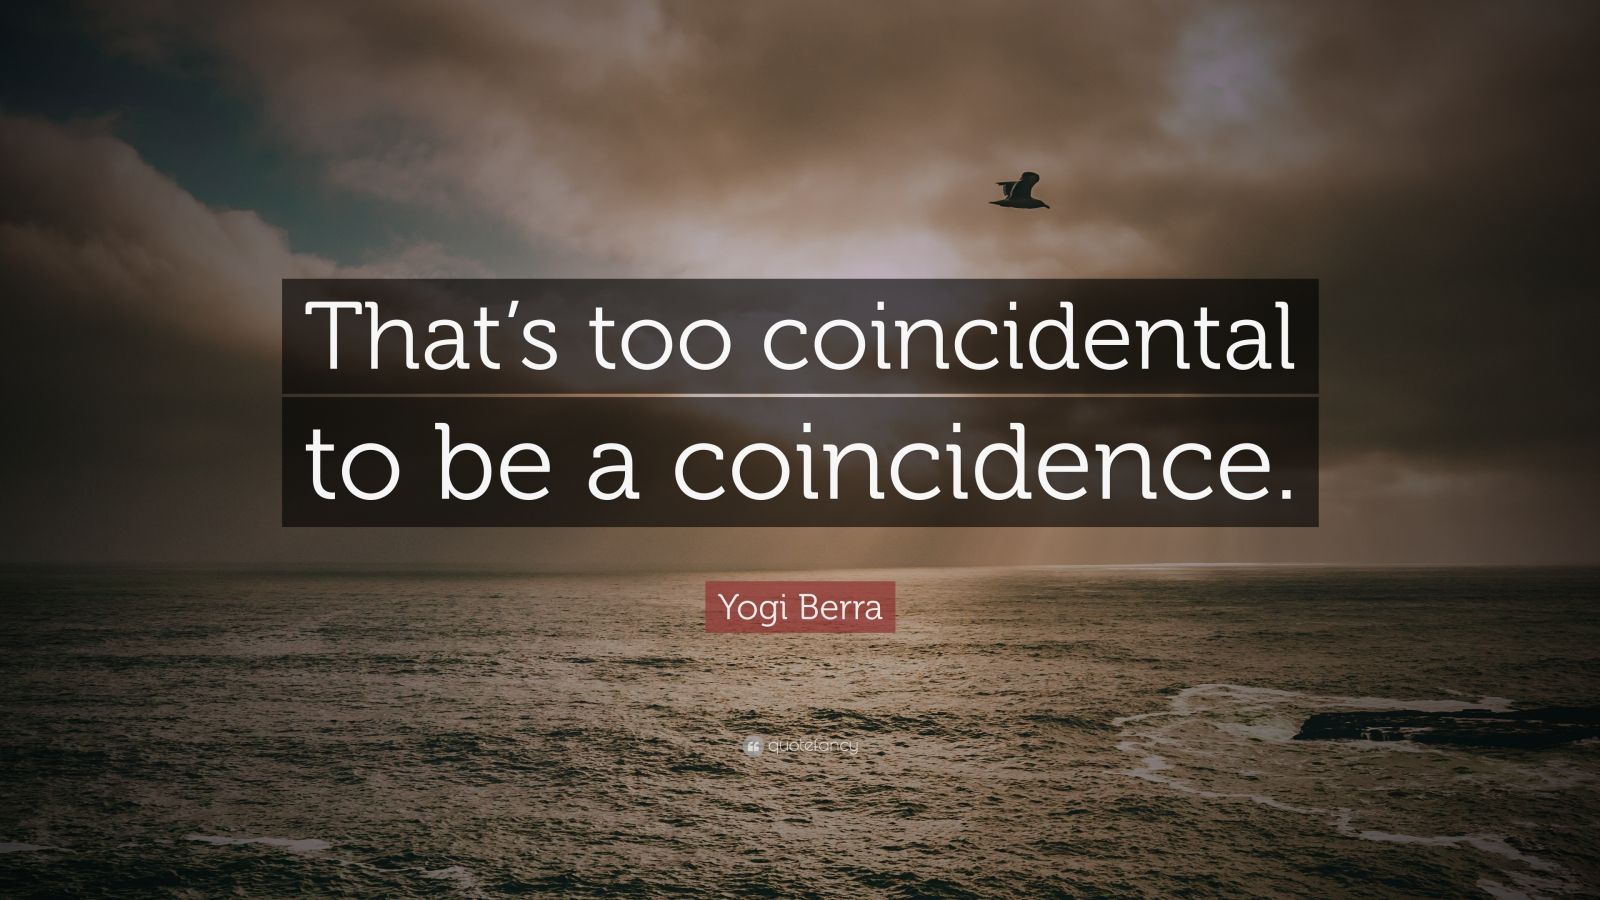 Yogi Berra Quote: “That’s too coincidental to be a coincidence.” (12